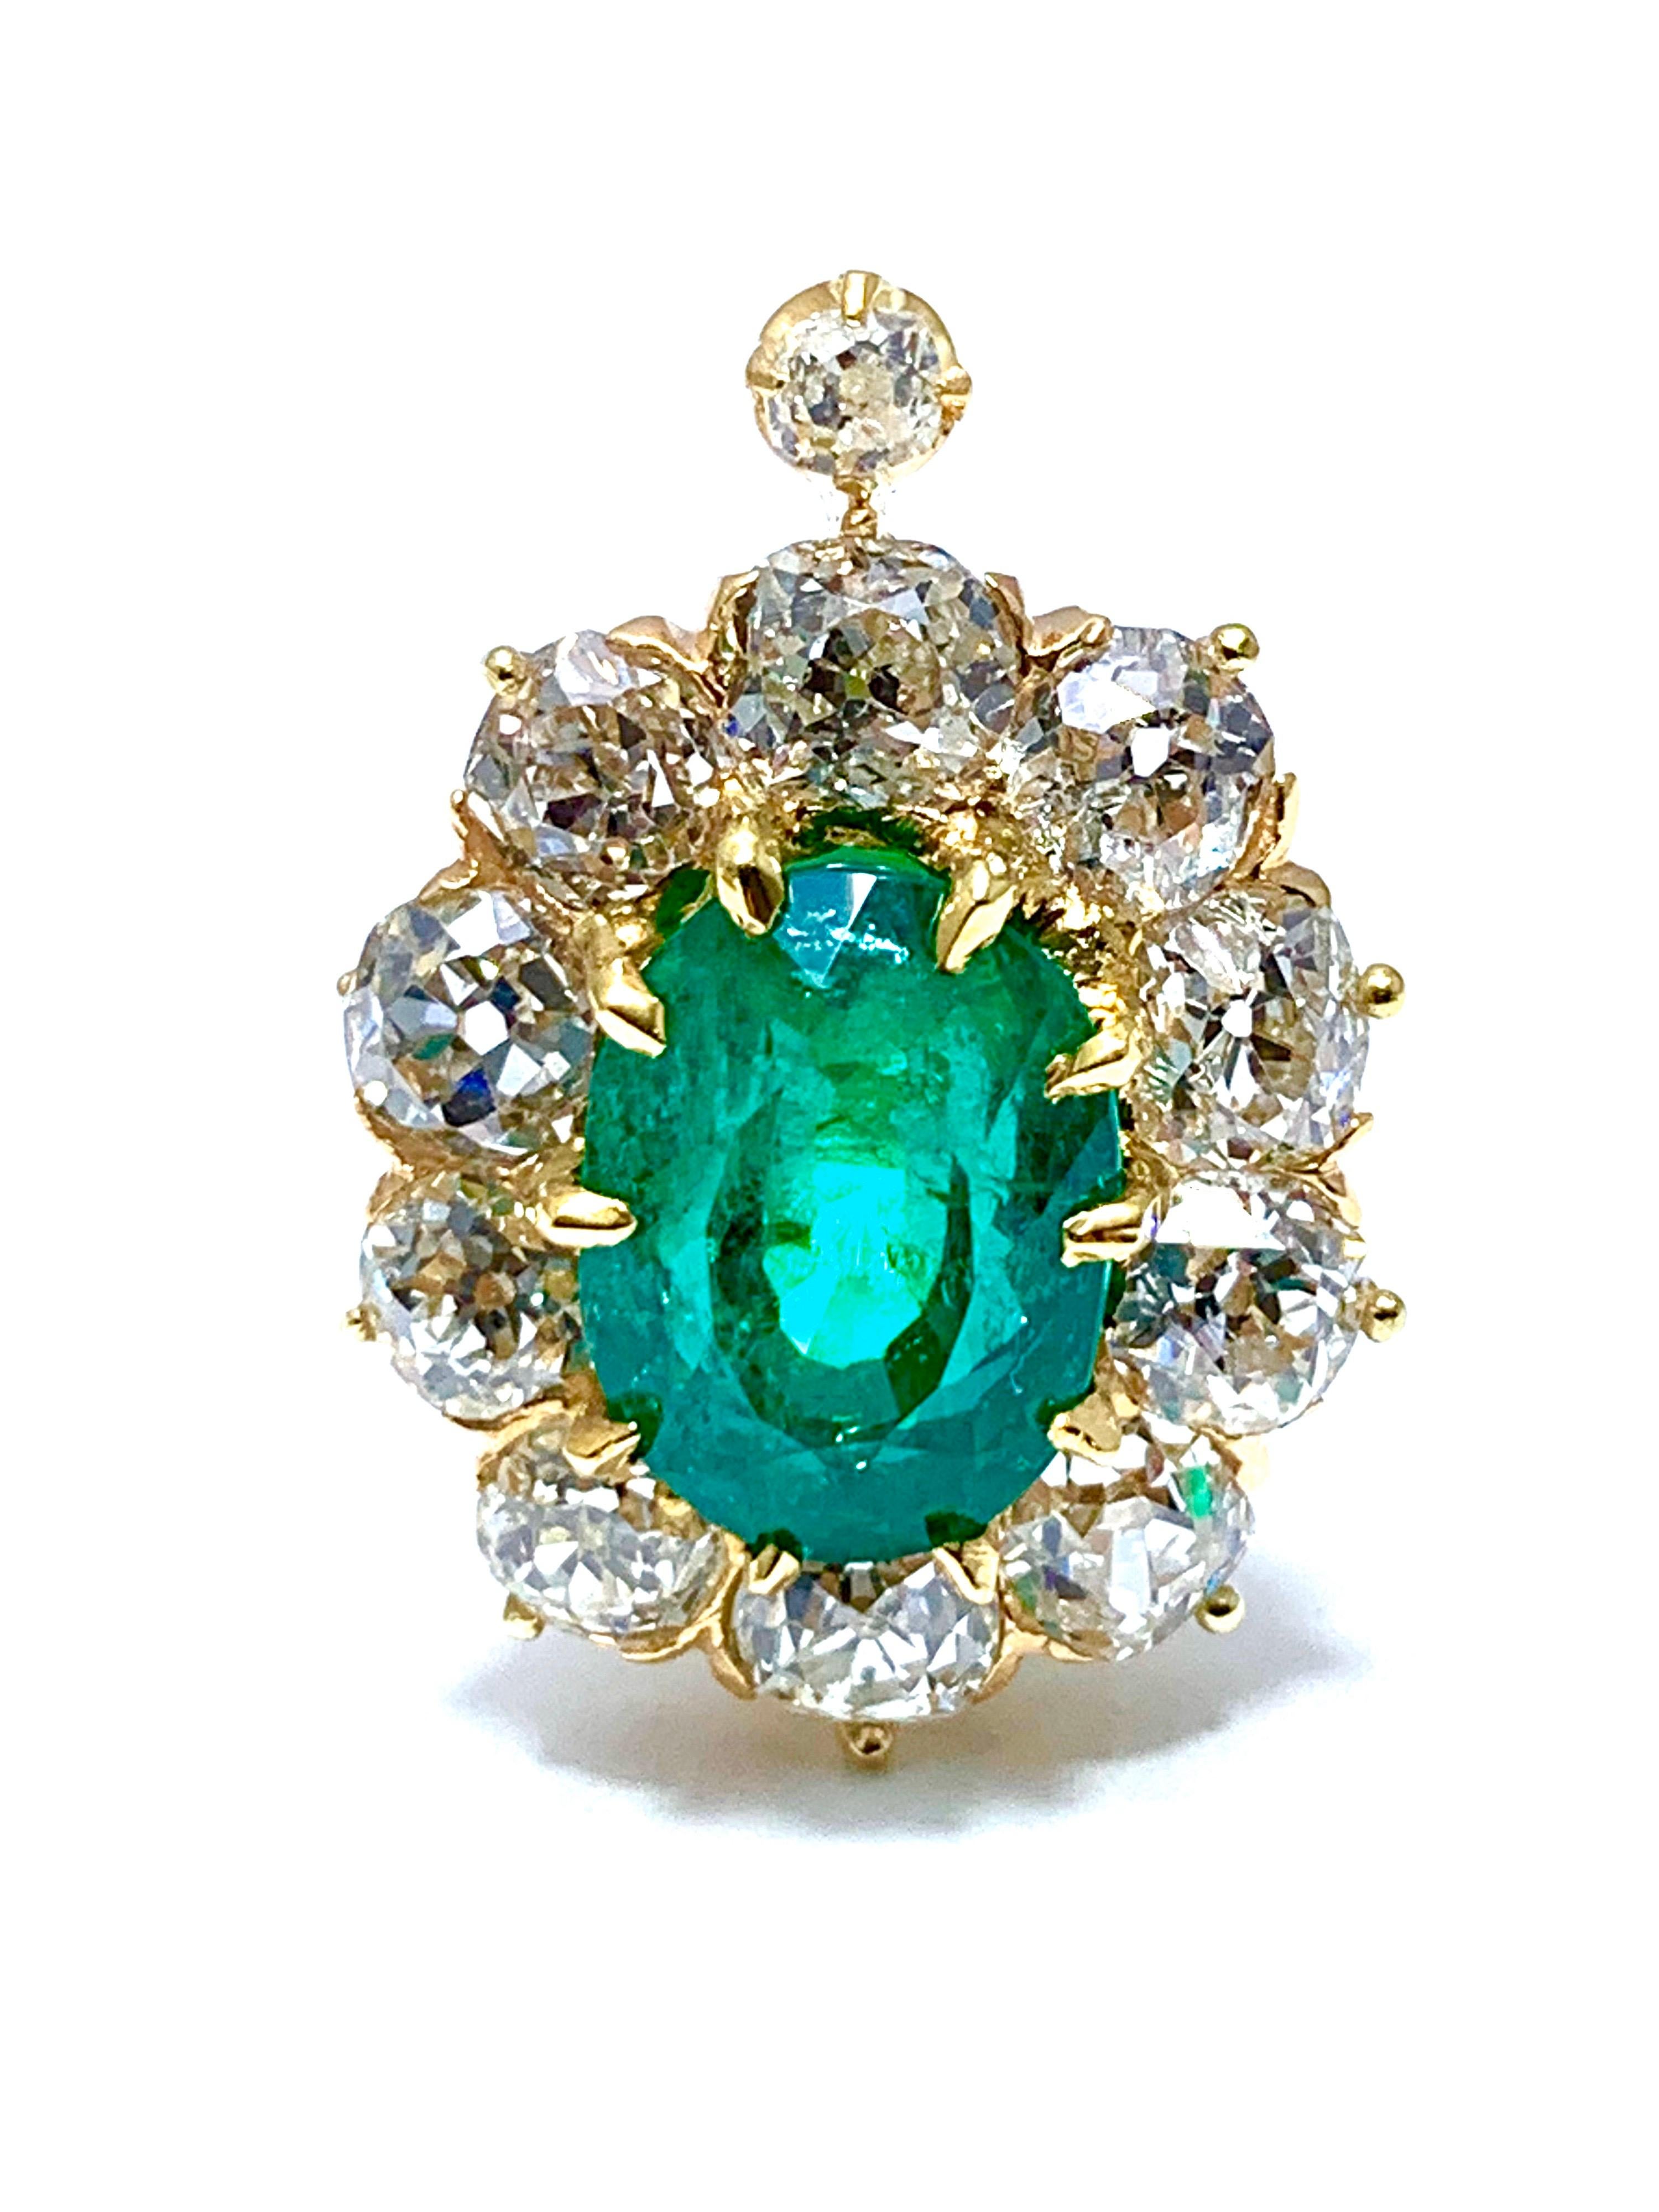 An absolutely stunning pair of natural Colombian emerald and old European cut diamond clip earrings, set in 18k yellow gold. The emeralds have a combined weight of 6.25cts, and an AGL report stating that they are natural, Colombian origin, with